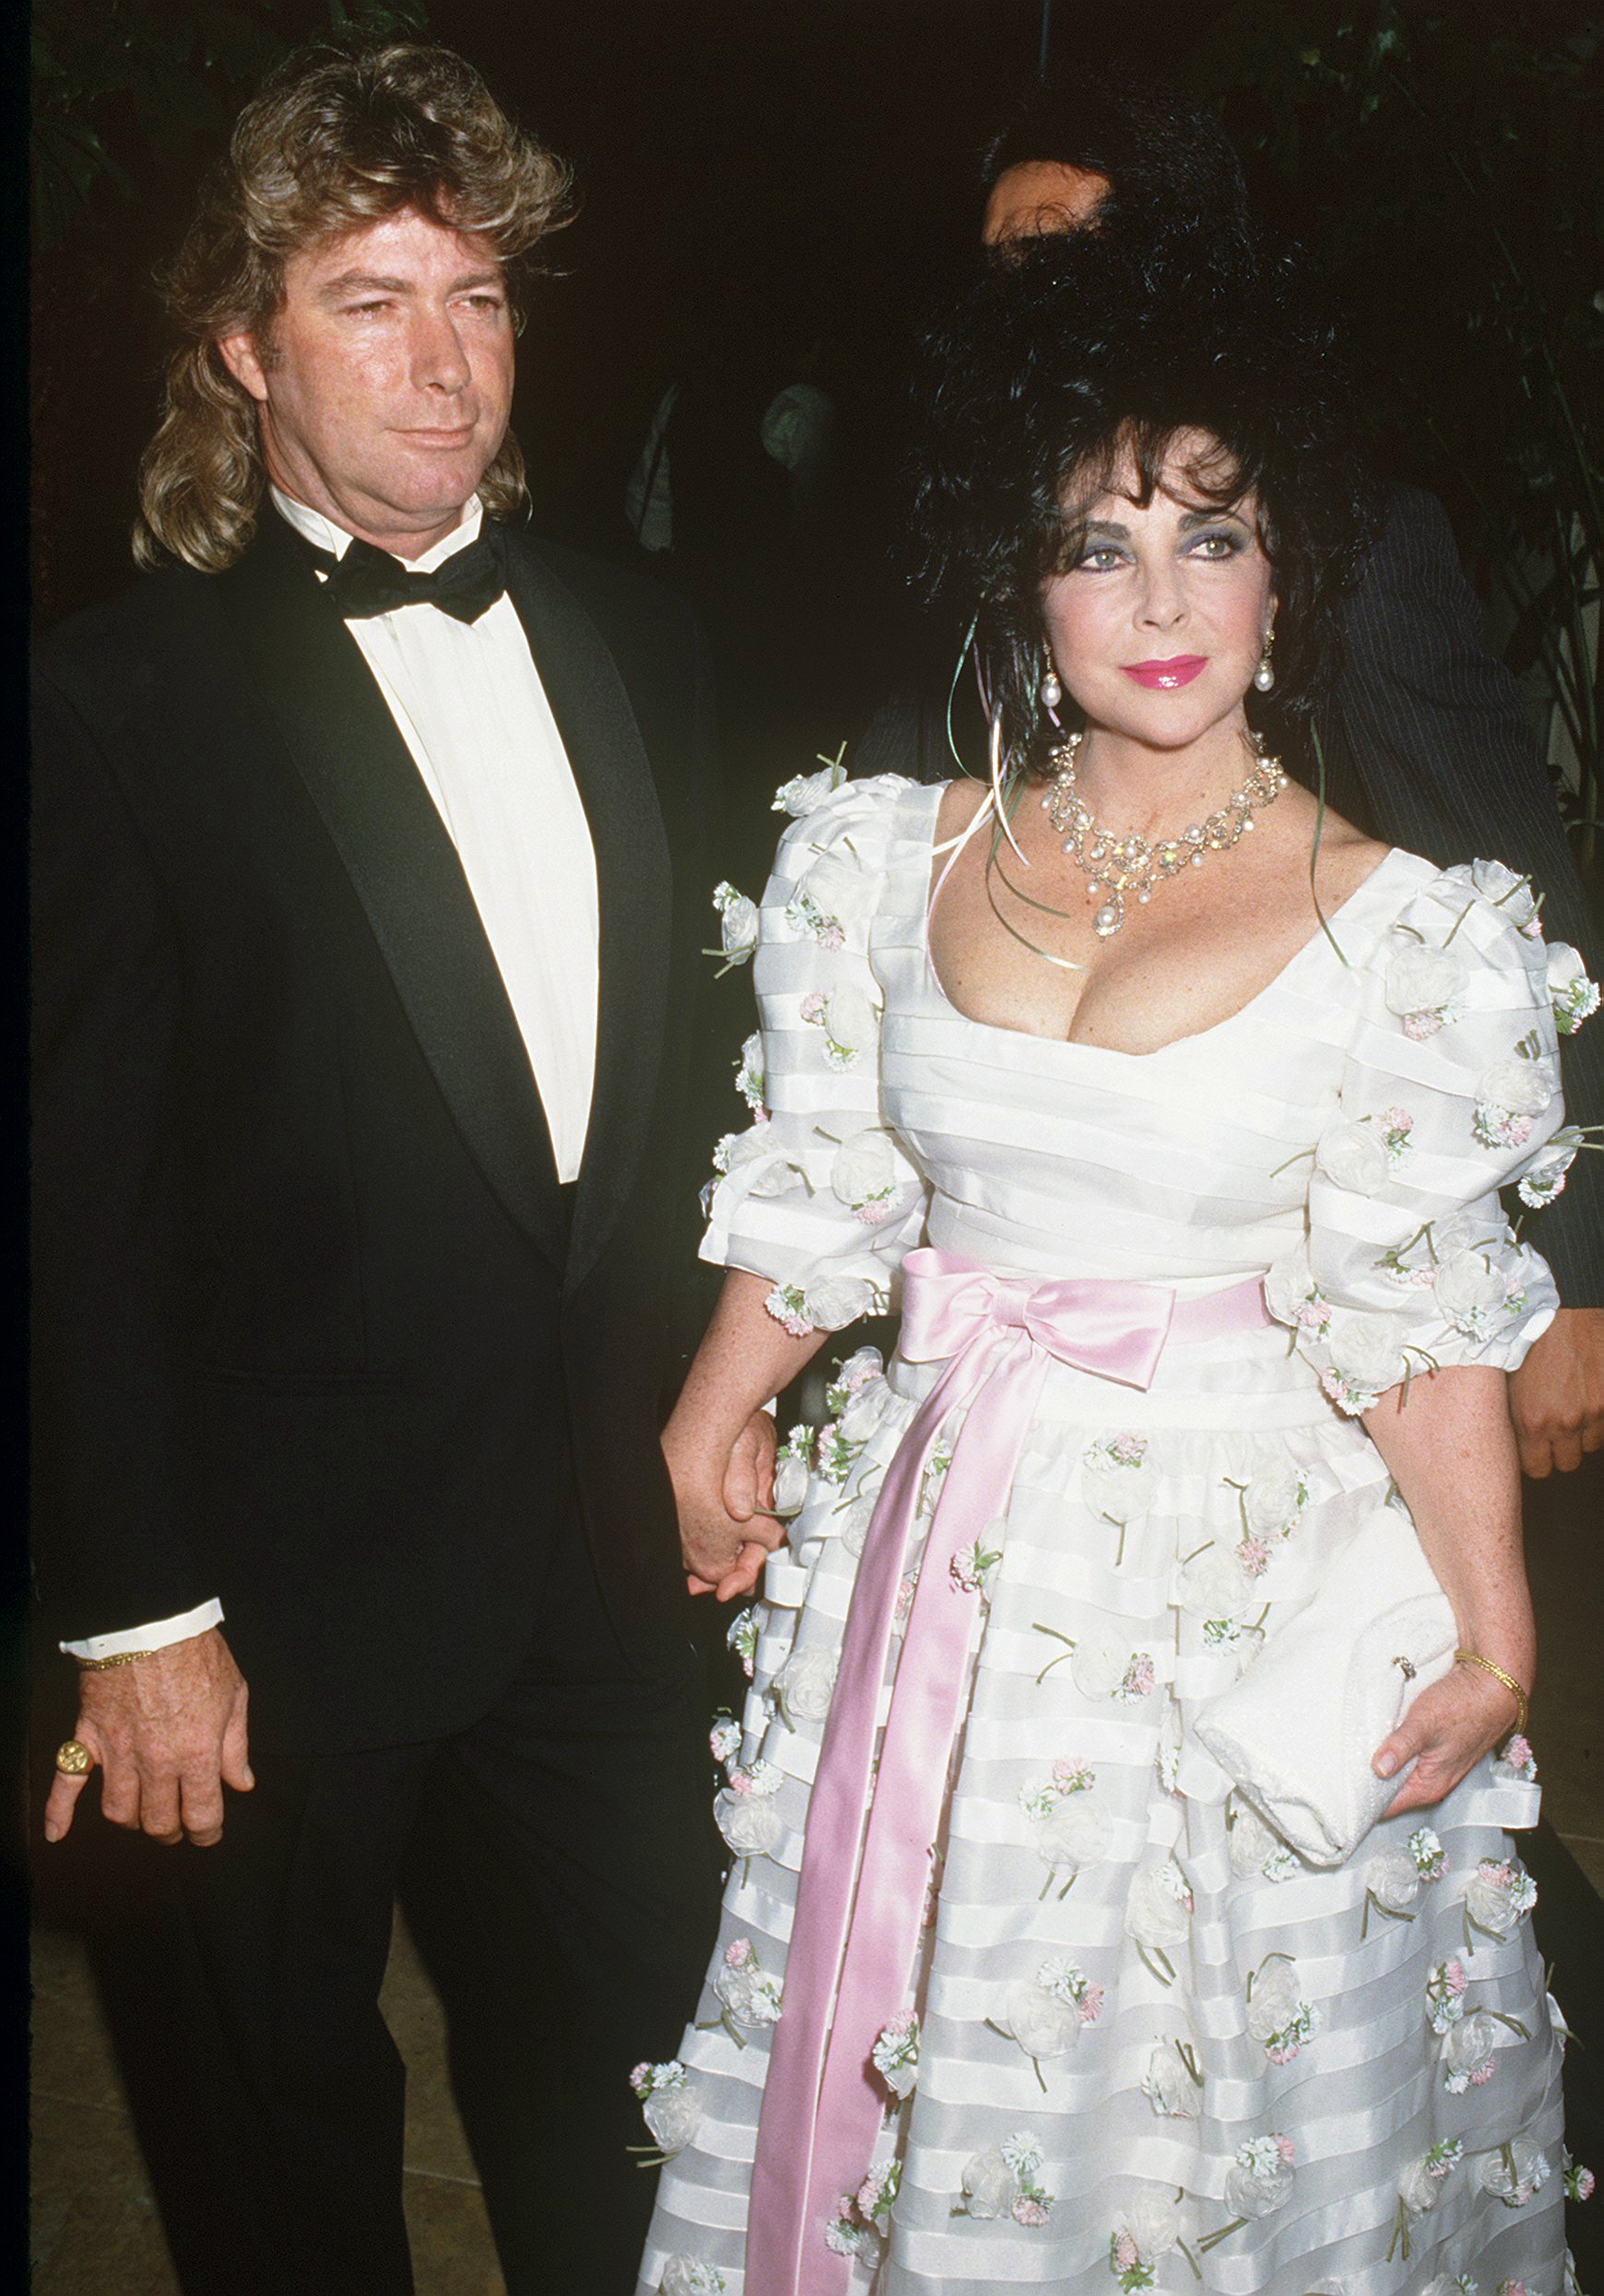 Actress Elizabeth Taylor (1932 - 2011) and her husband Larry Fortensky (1952 - 2016) attending the Carousel of Hope at the Beverly Hilton Hotel, USA, 16th May 1992. | Source: Getty Images